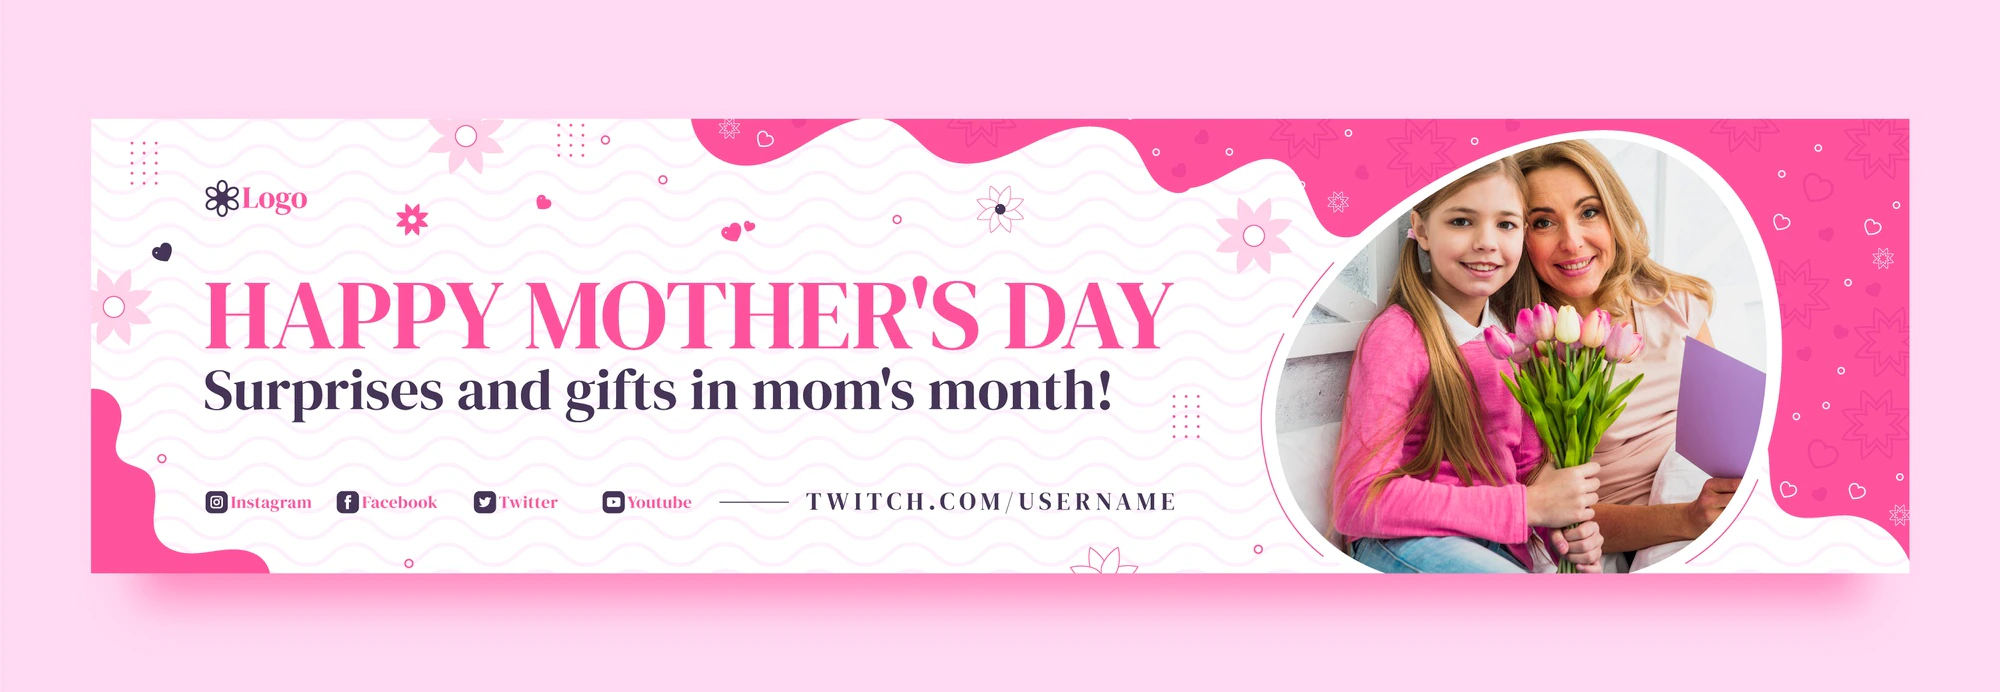 Flat Mother S Day Twitch Banner 23 2149368669